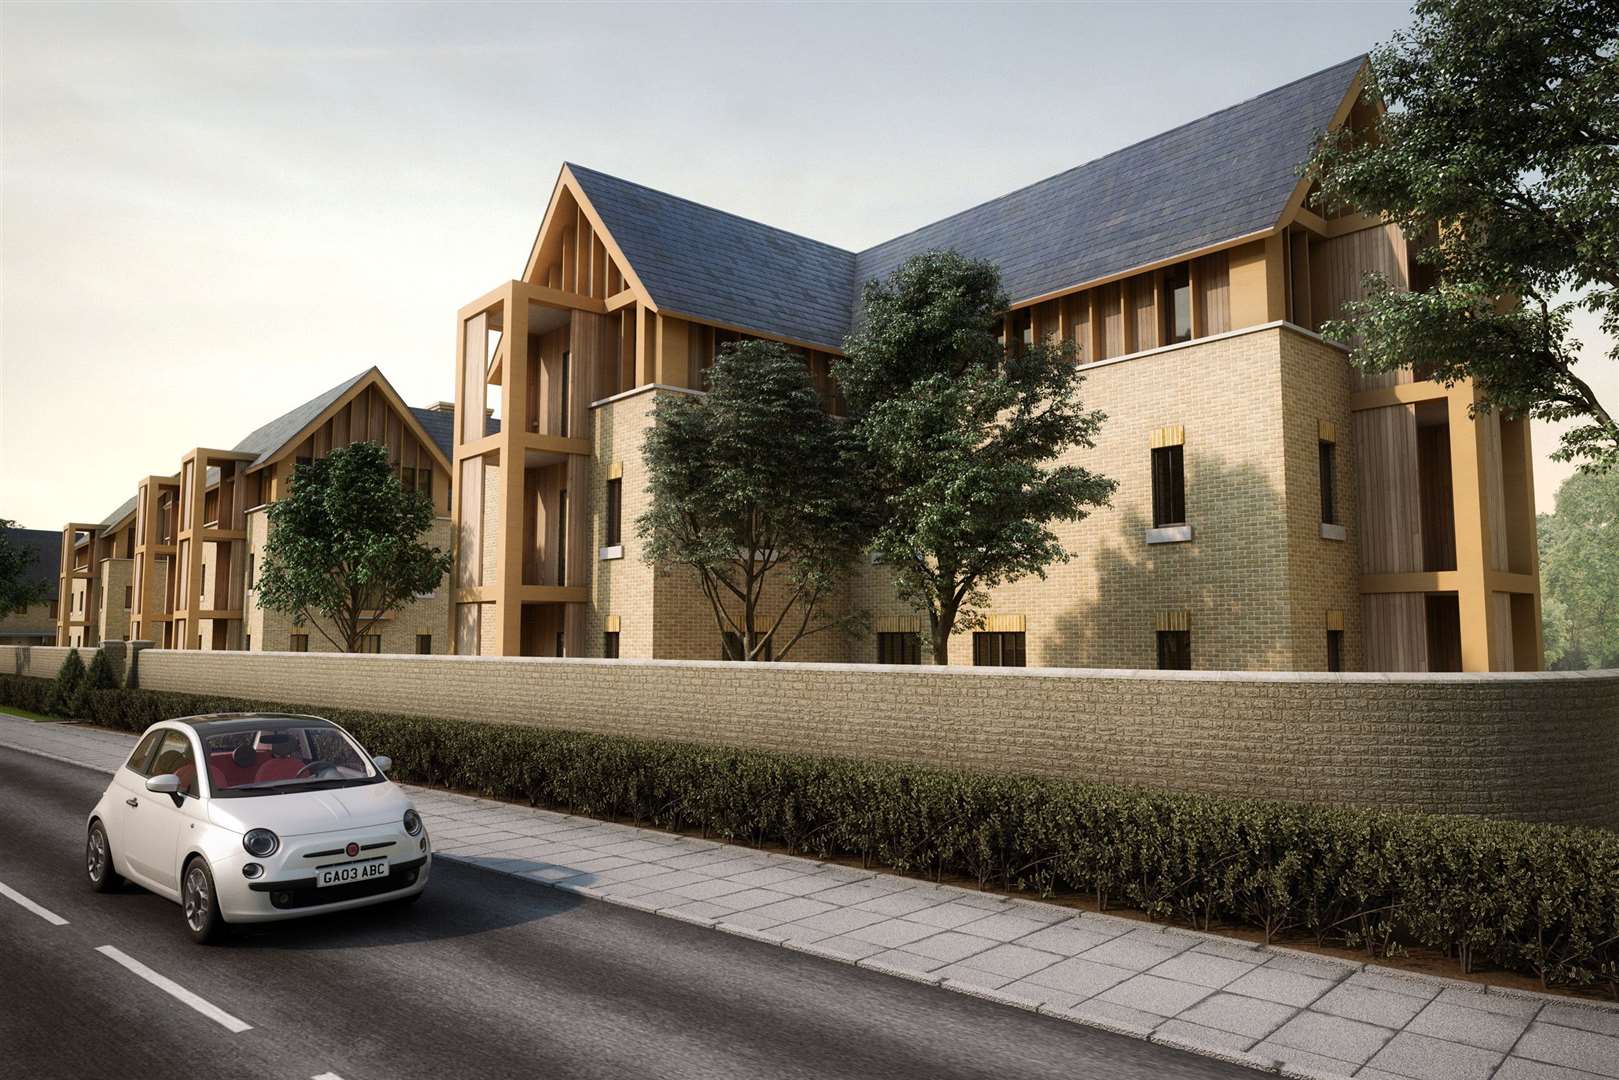 The Centenary Village will be located along Hermitage lane, near Maidstone. Picture: RBLI